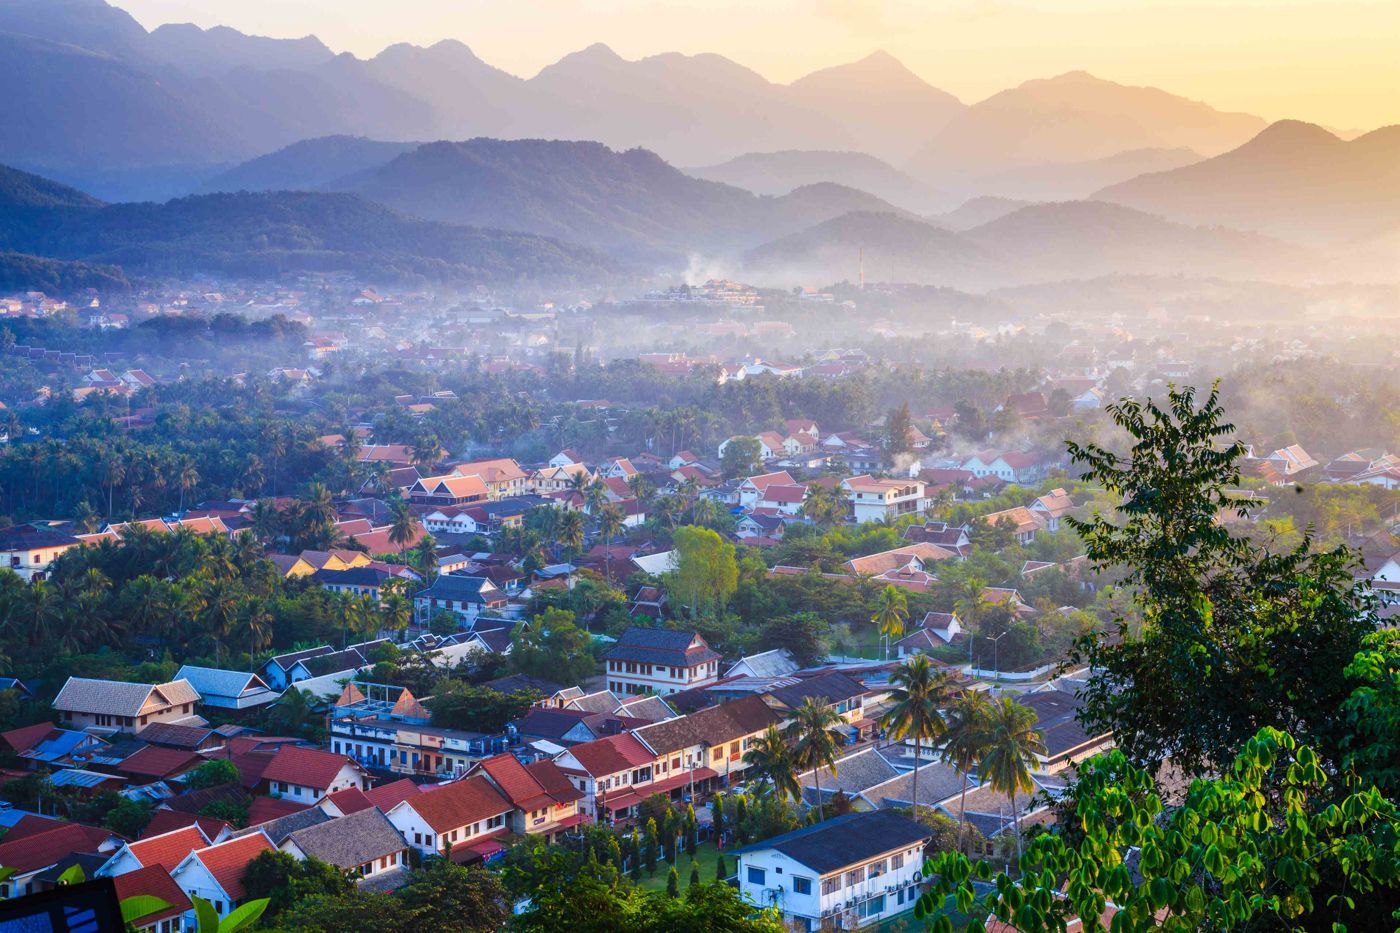 Where to visit first in Laos